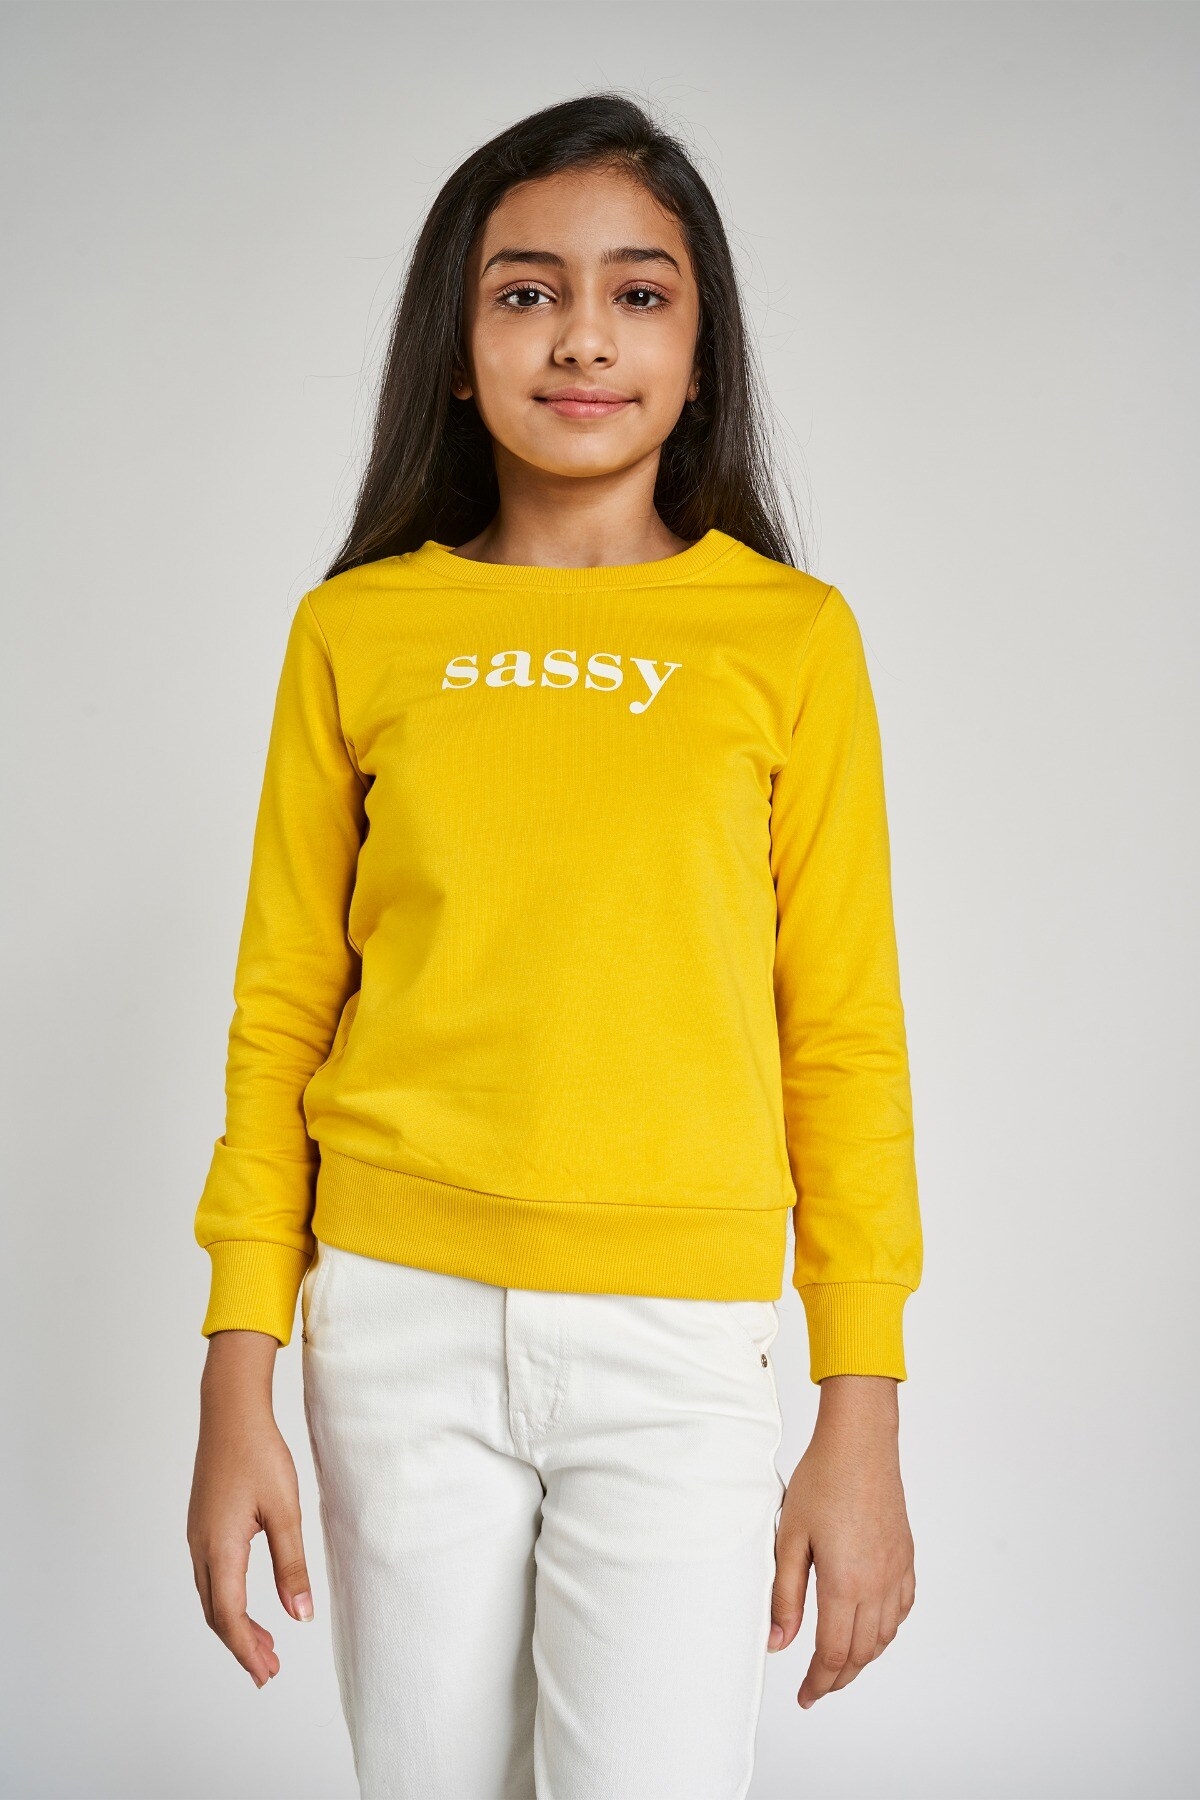 AND | YELLOW TOP